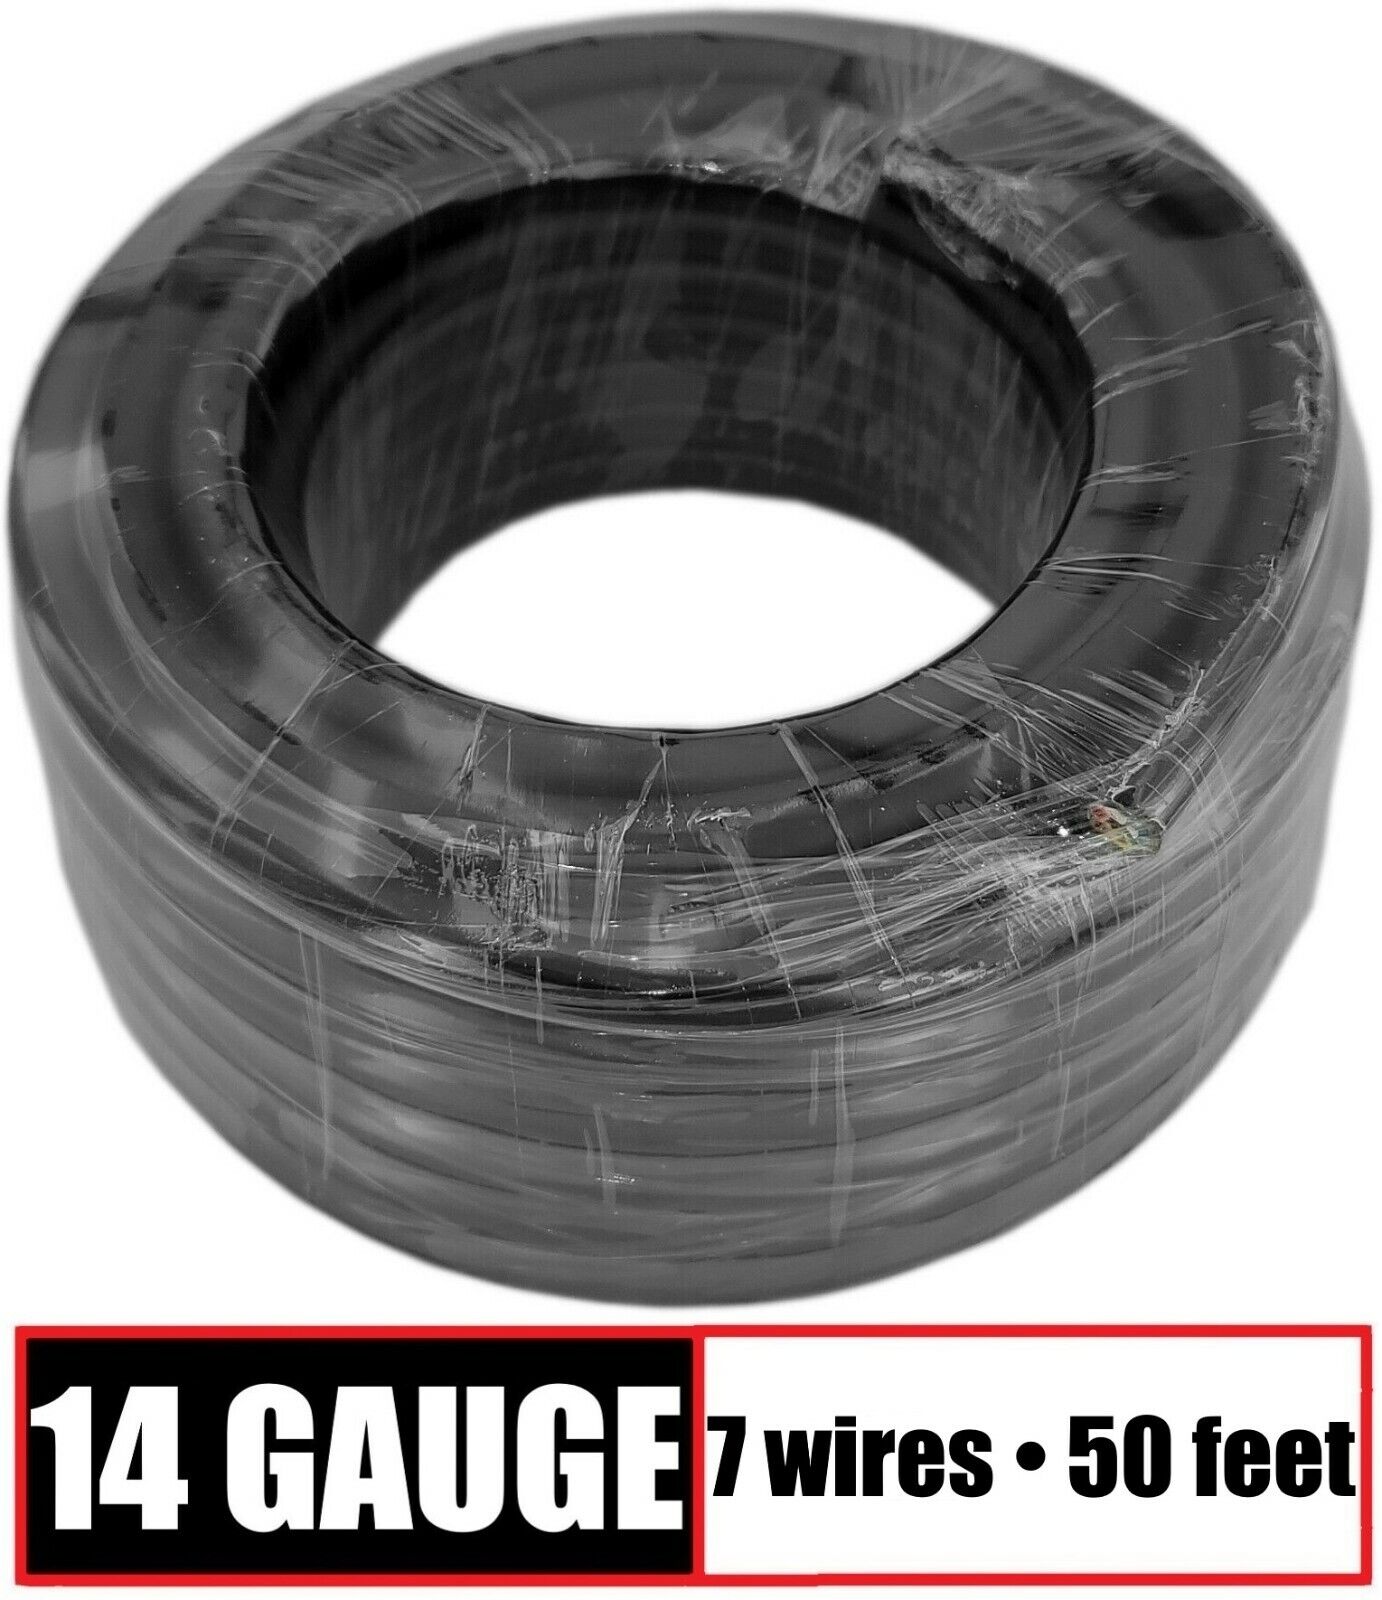 14 Gauge 7 Way Conductor RV Trailer Wire Cable Wiring Insulated - 50 Feet 14/7